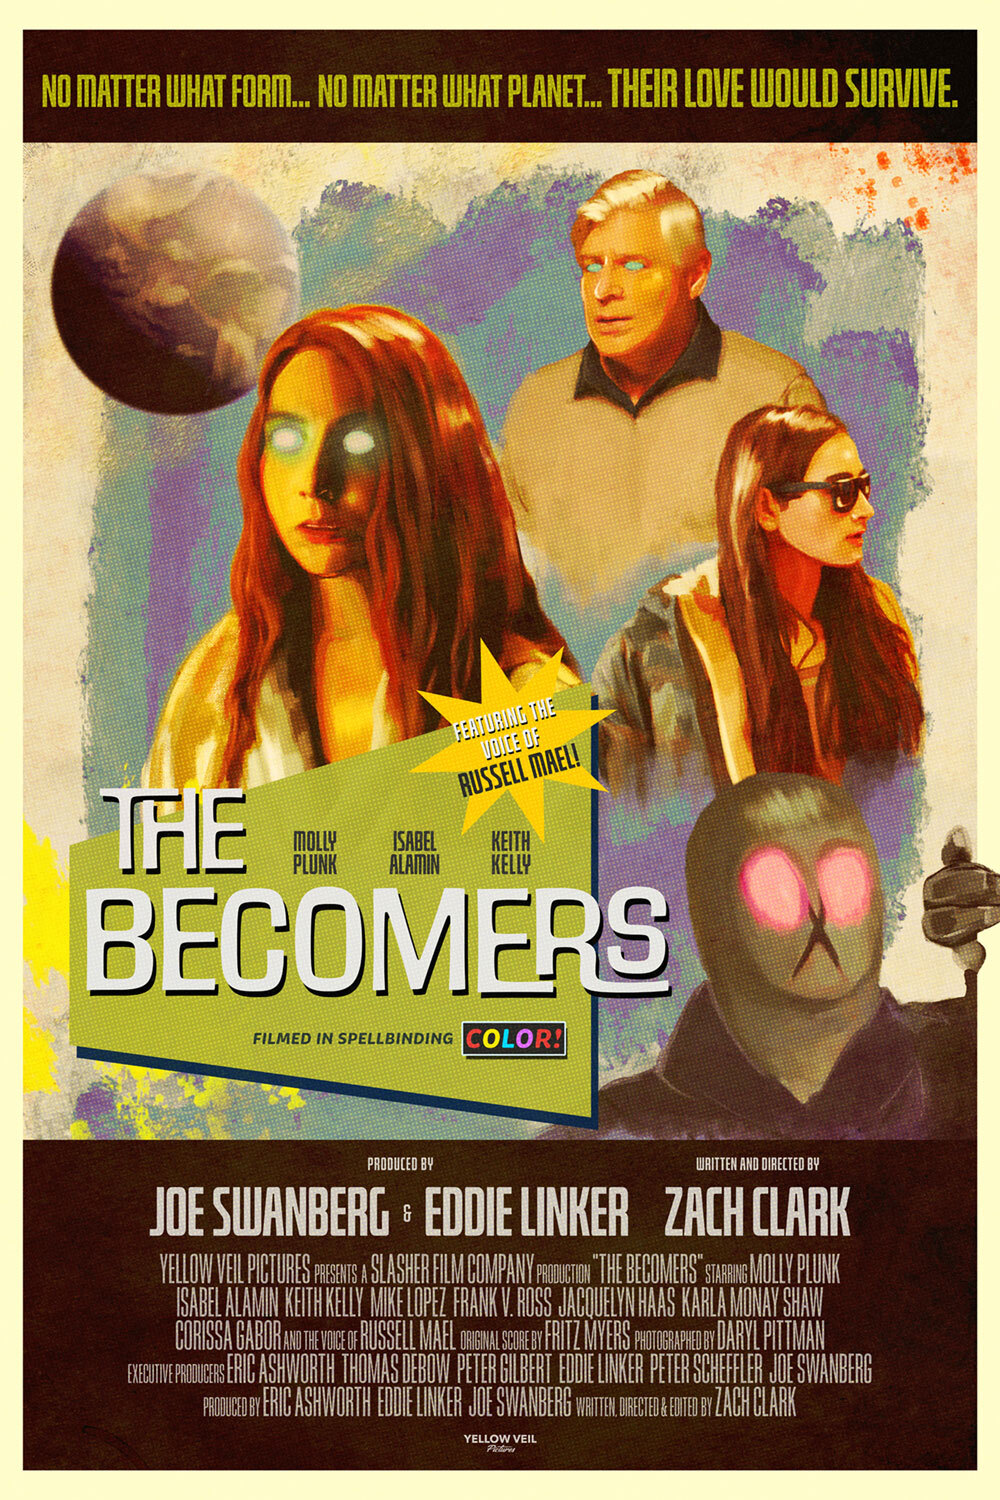 Movie poster for The Becomers, collage of characters with glowing eyes